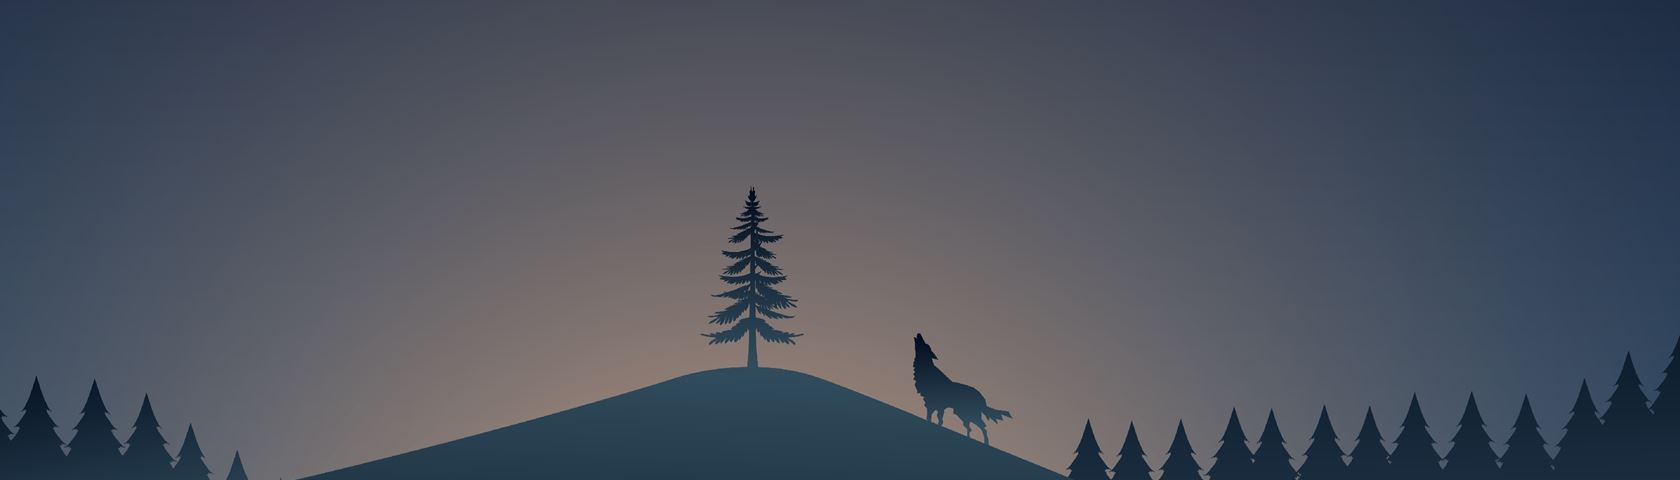 Wolf in the forest